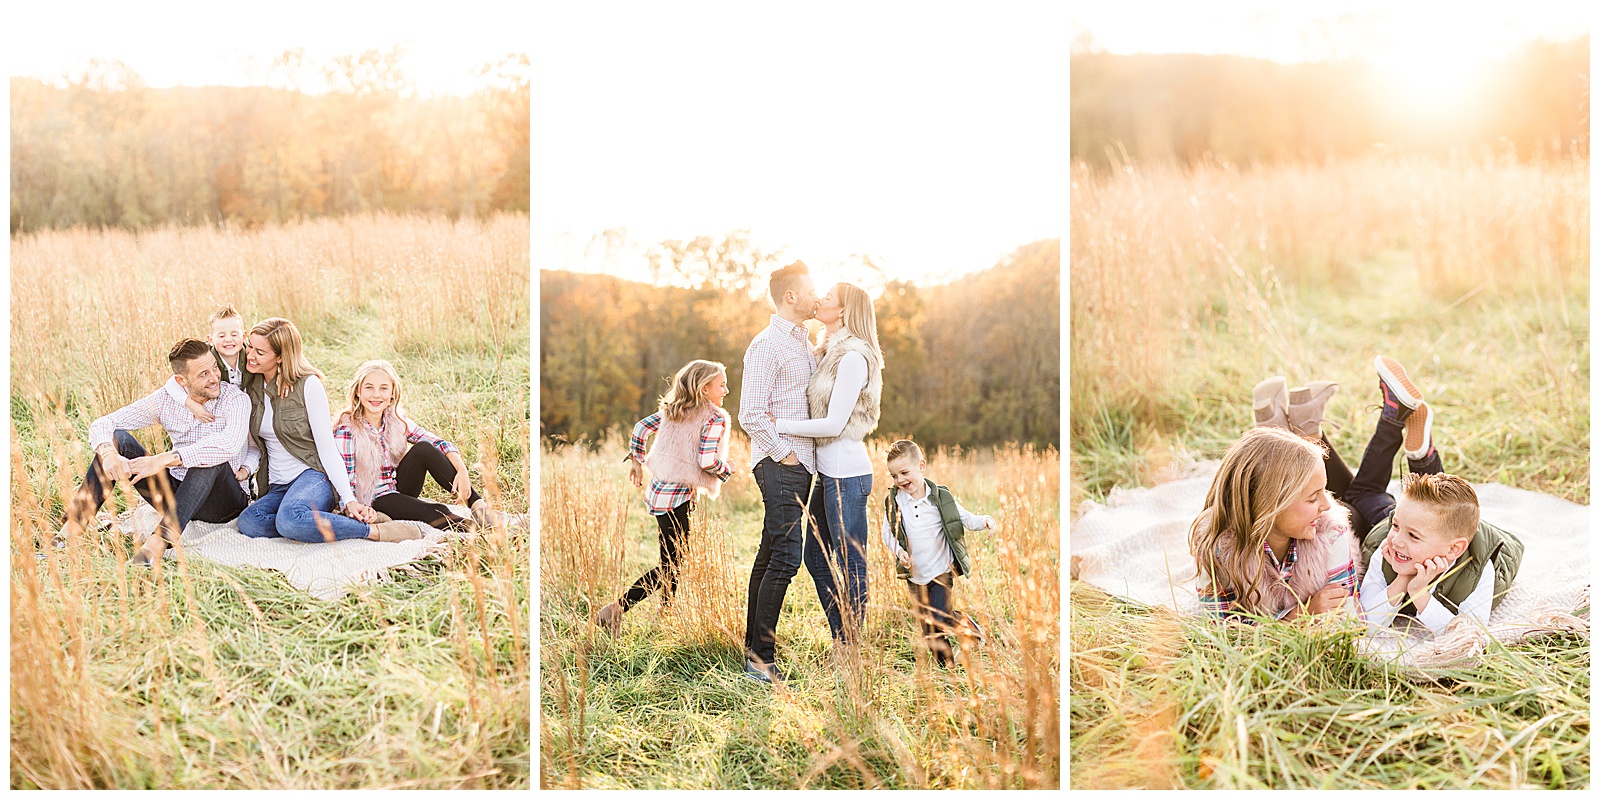 baltimore, maryland, portrait photographer, portrait, photographer, spring mini sessions, spring 2019, spring, 2019, mini, session, family, maternity, pregnancy announcement, toddlers, engagement, outdoors, field, meadow, golden hour, sunset, neutral, outdoors, nature, cute, happy, love, hannah mink photography